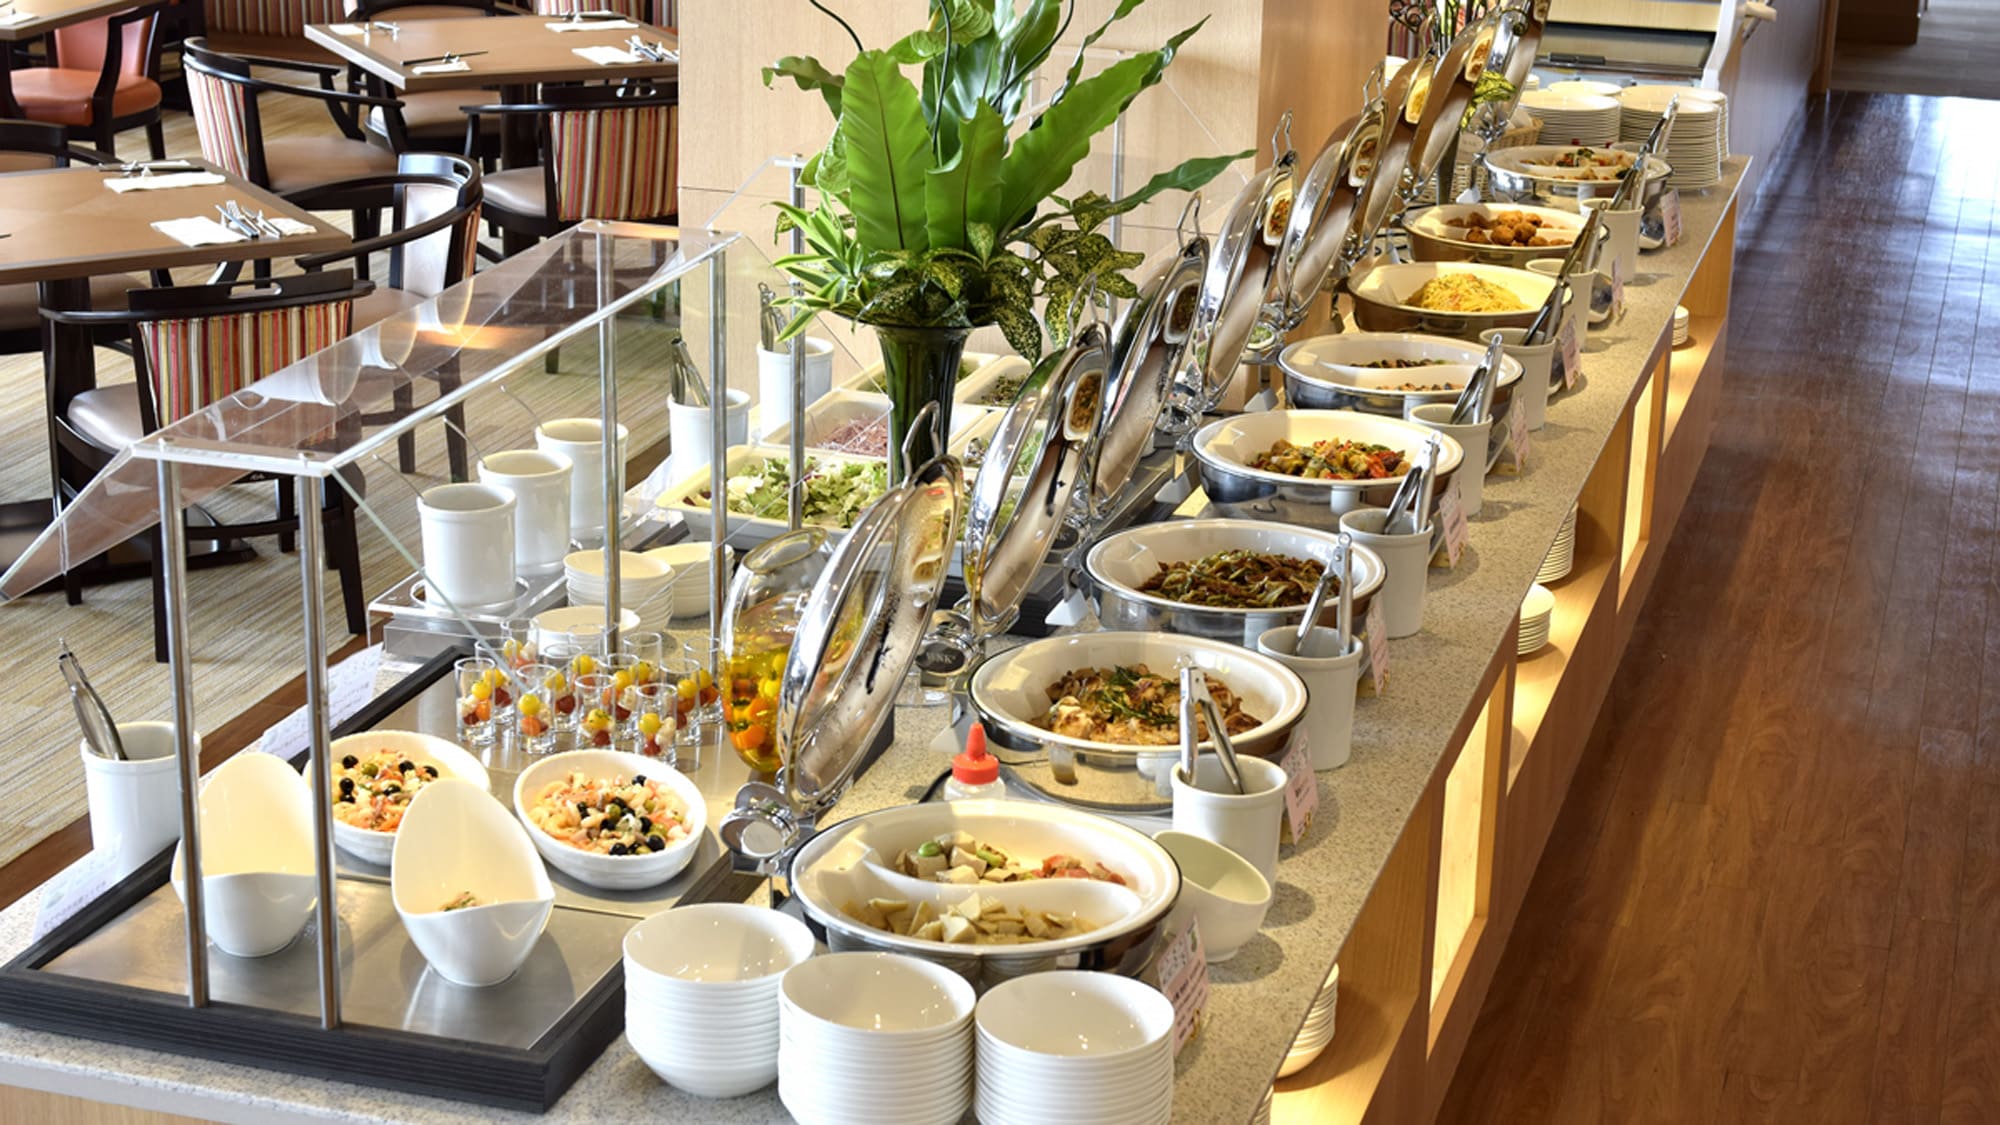 ◆ <Breakfast Buffet> Start your day with breakfast! You can enjoy more than 45 kinds of dishes.